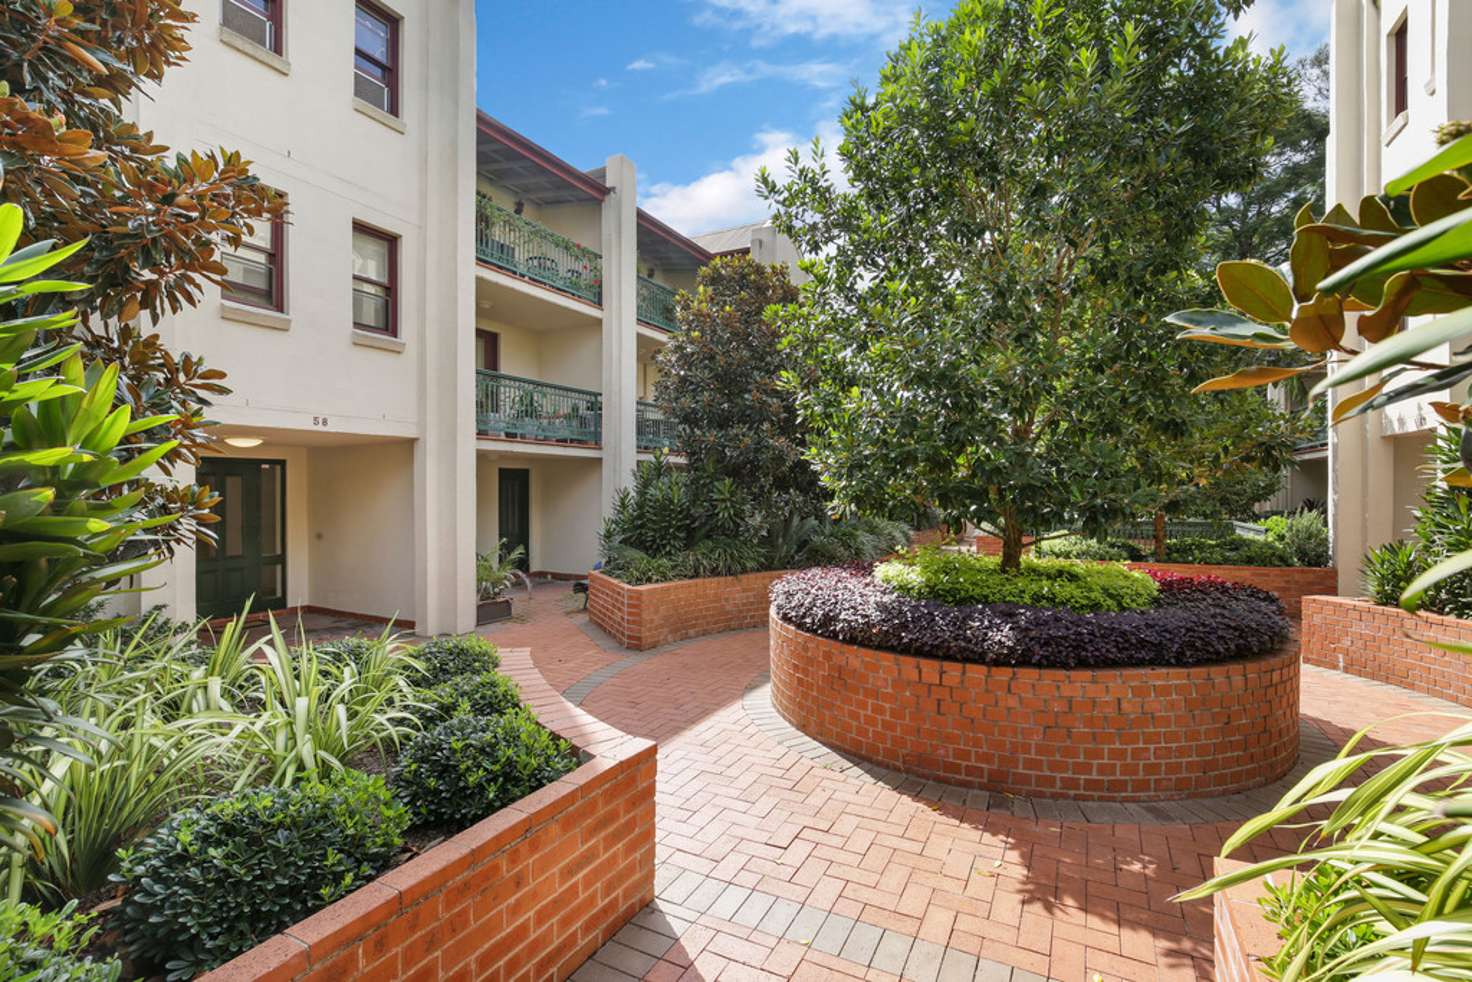 Main view of Homely apartment listing, 8/58 Park Street, Erskineville NSW 2043